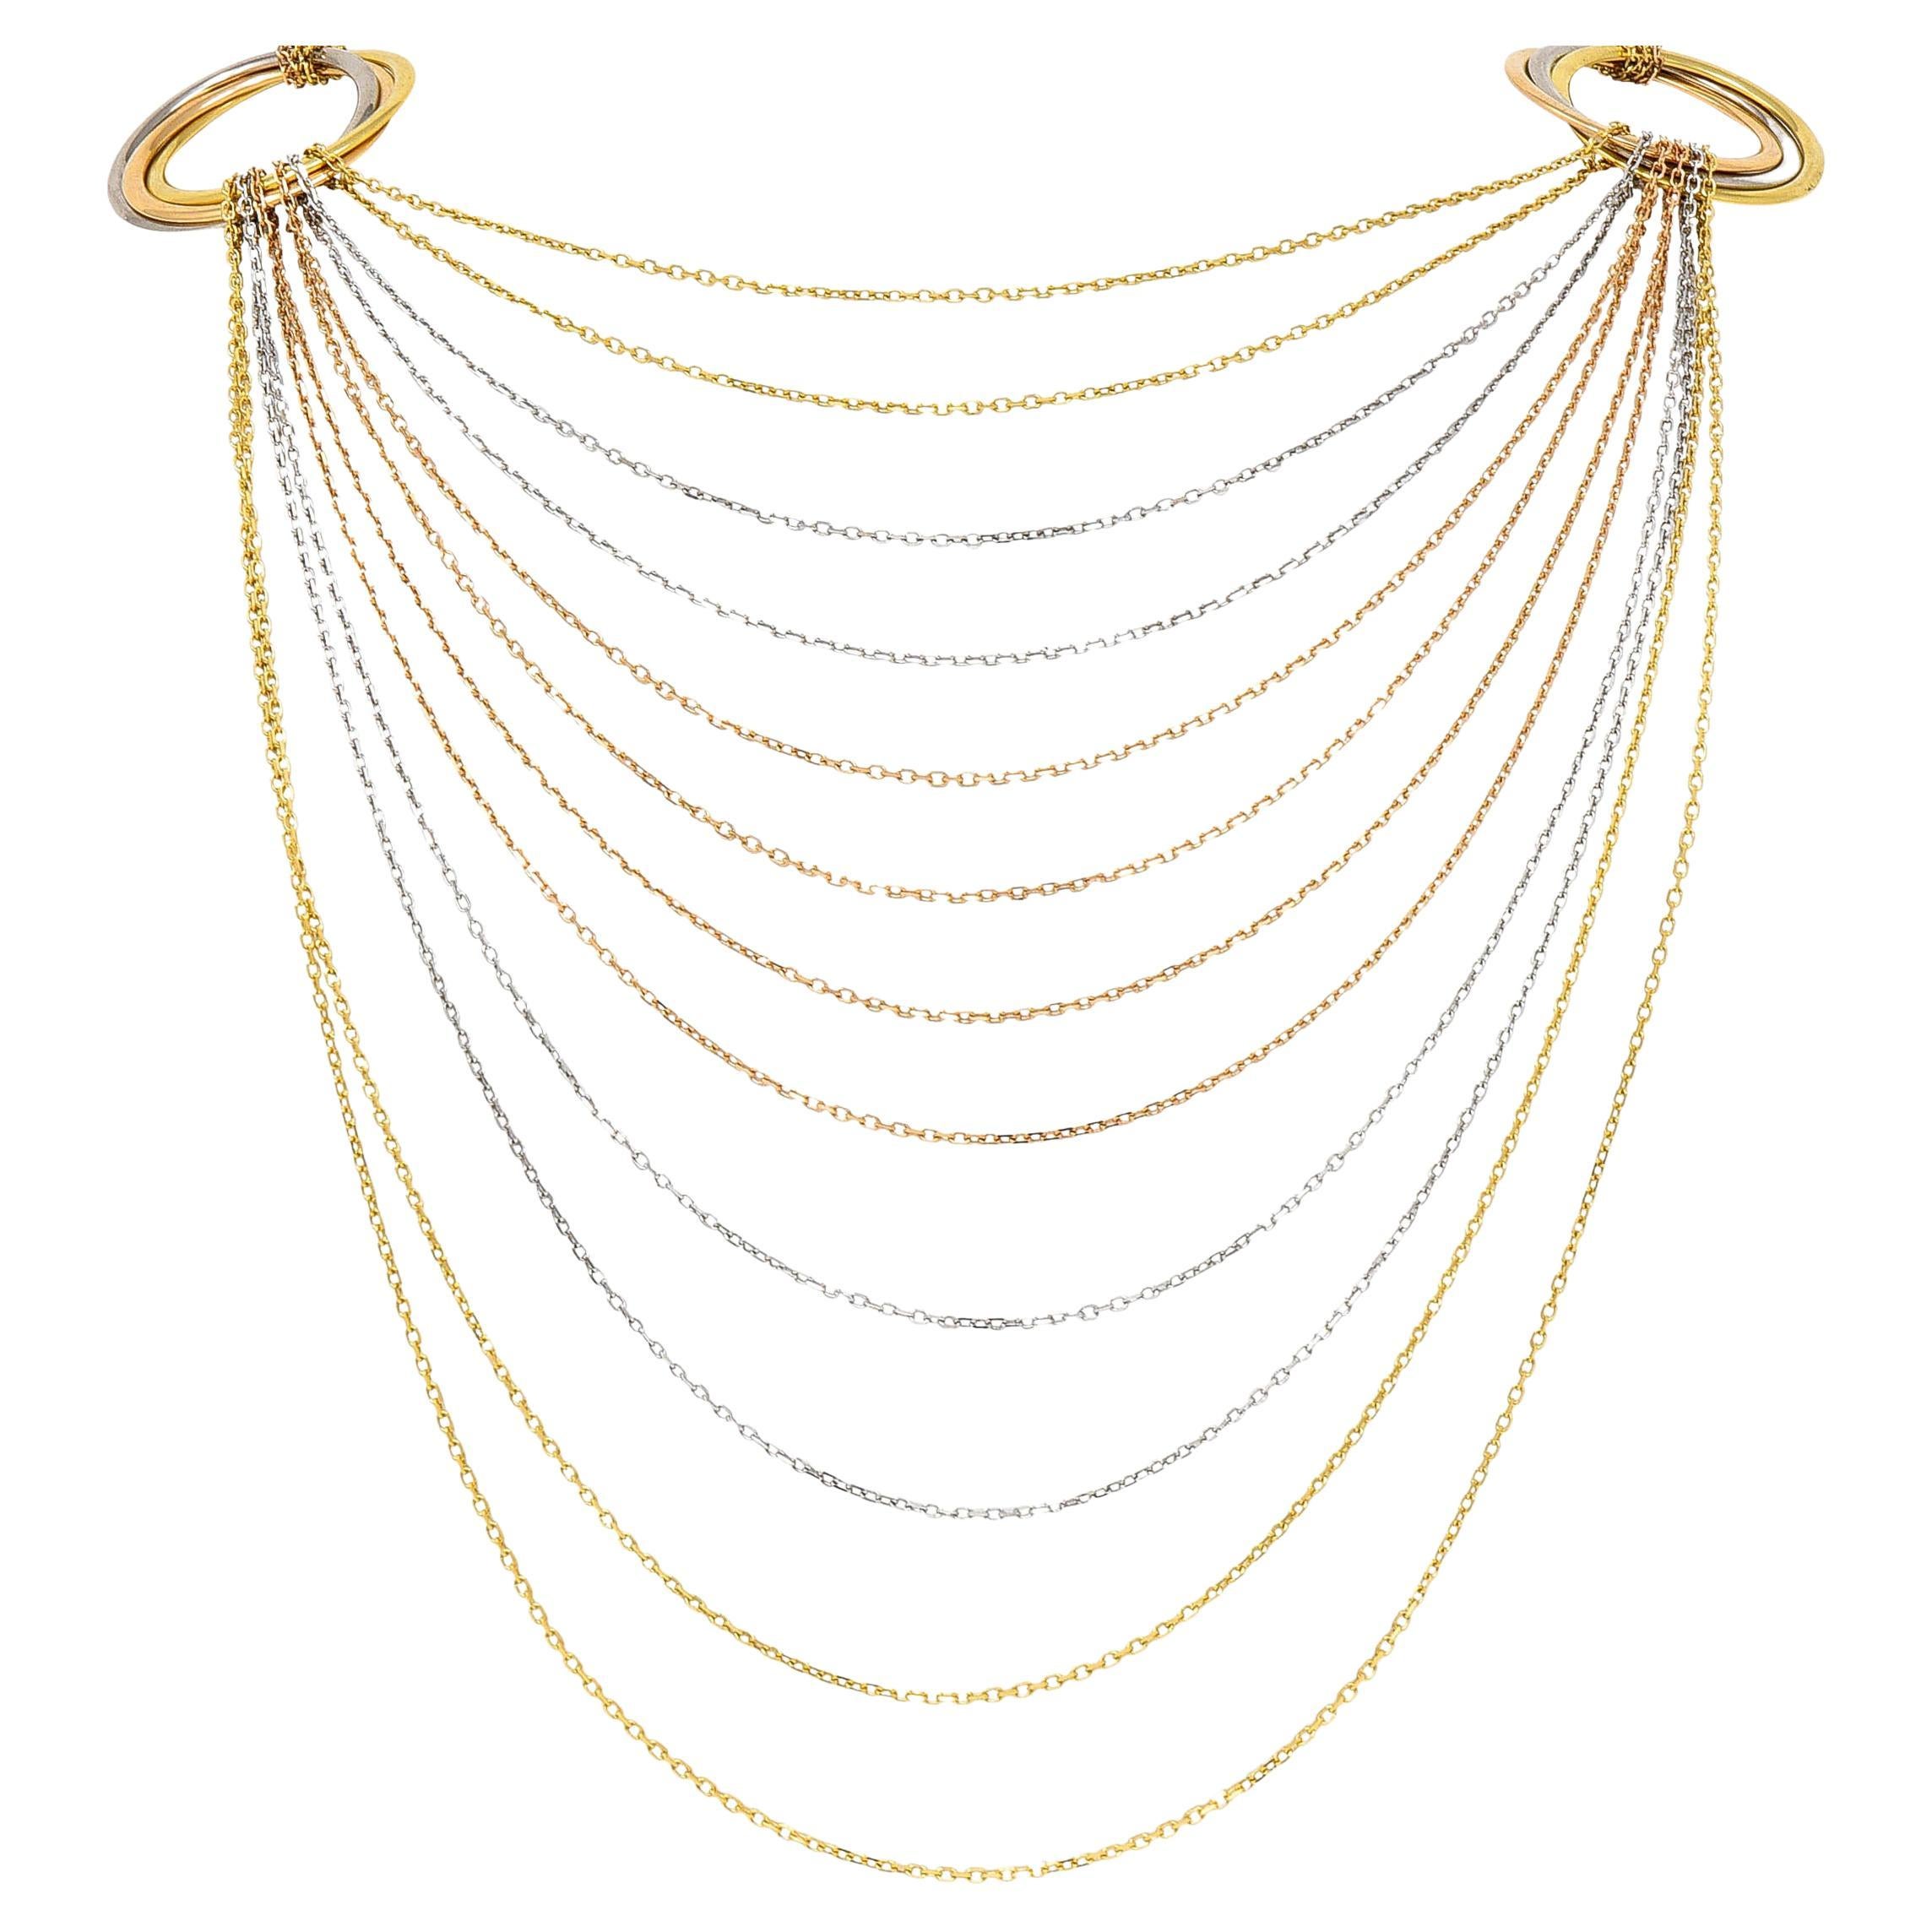 Cartier 18 Karat Tri-Colored Rose Yellow White Gold Trinity Strand Necklace